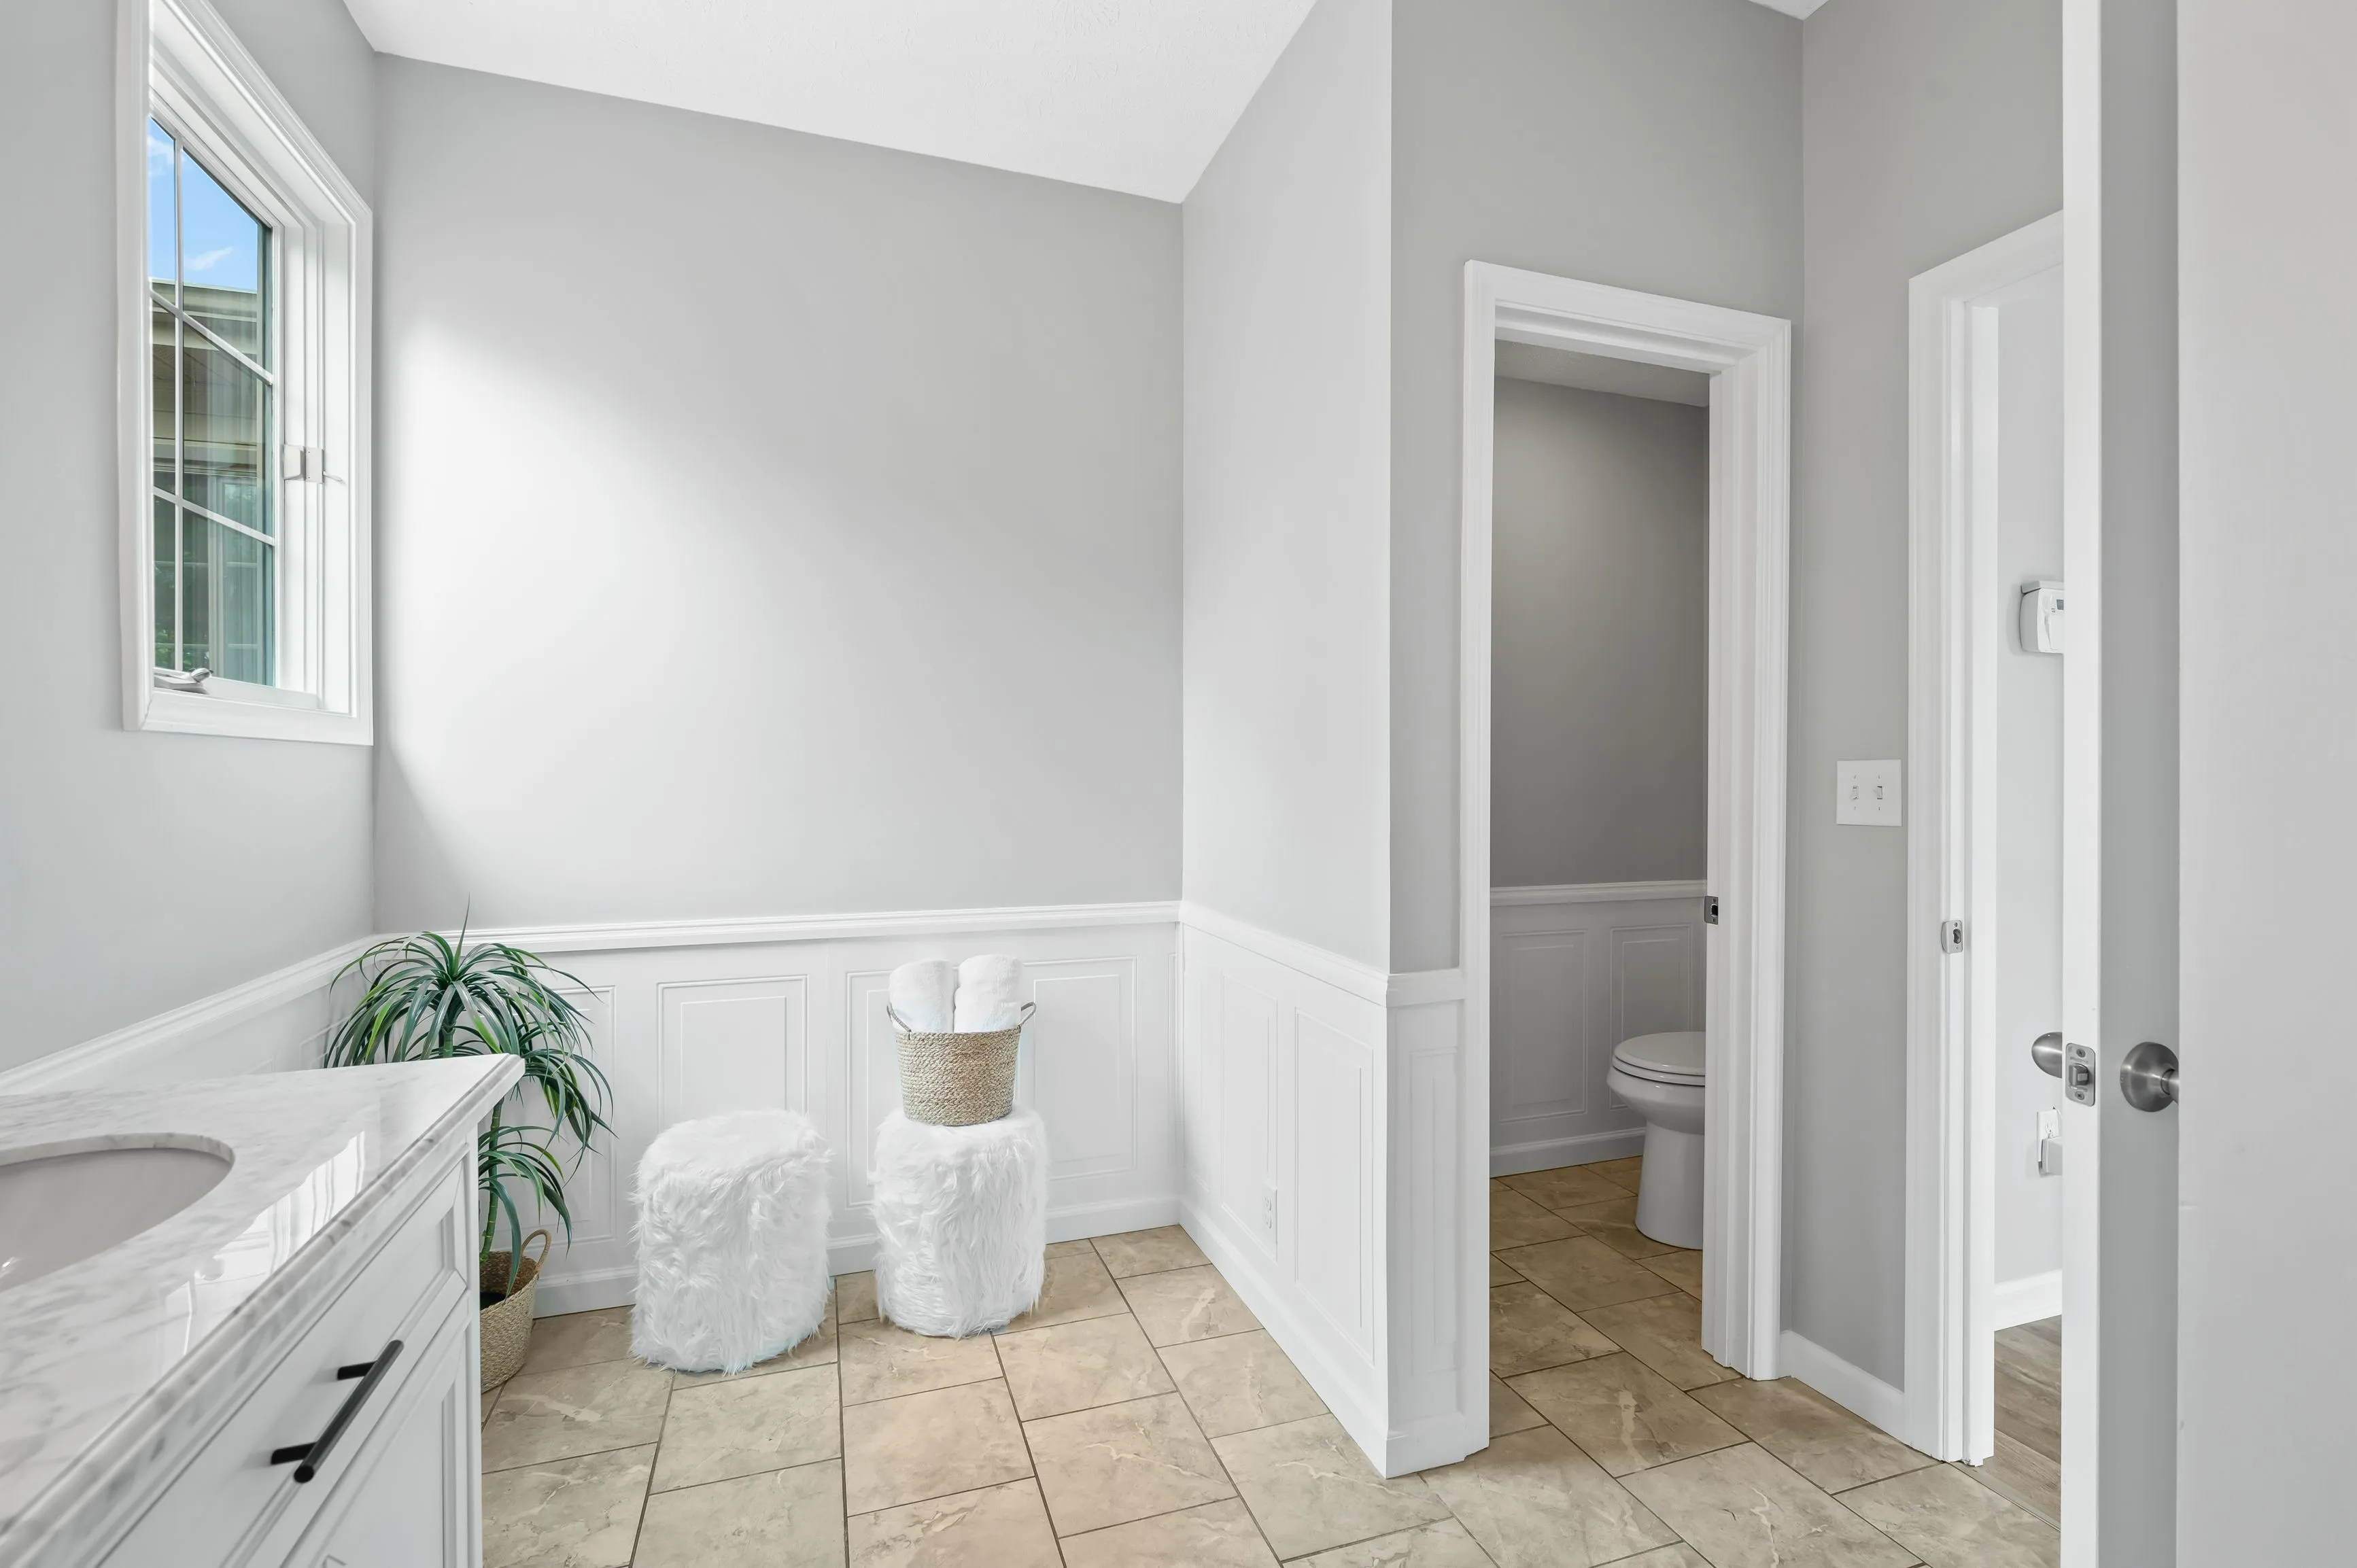 Bright bathroom interior with a dual sink vanity, large mirror, bathtub, and separate toilet room.